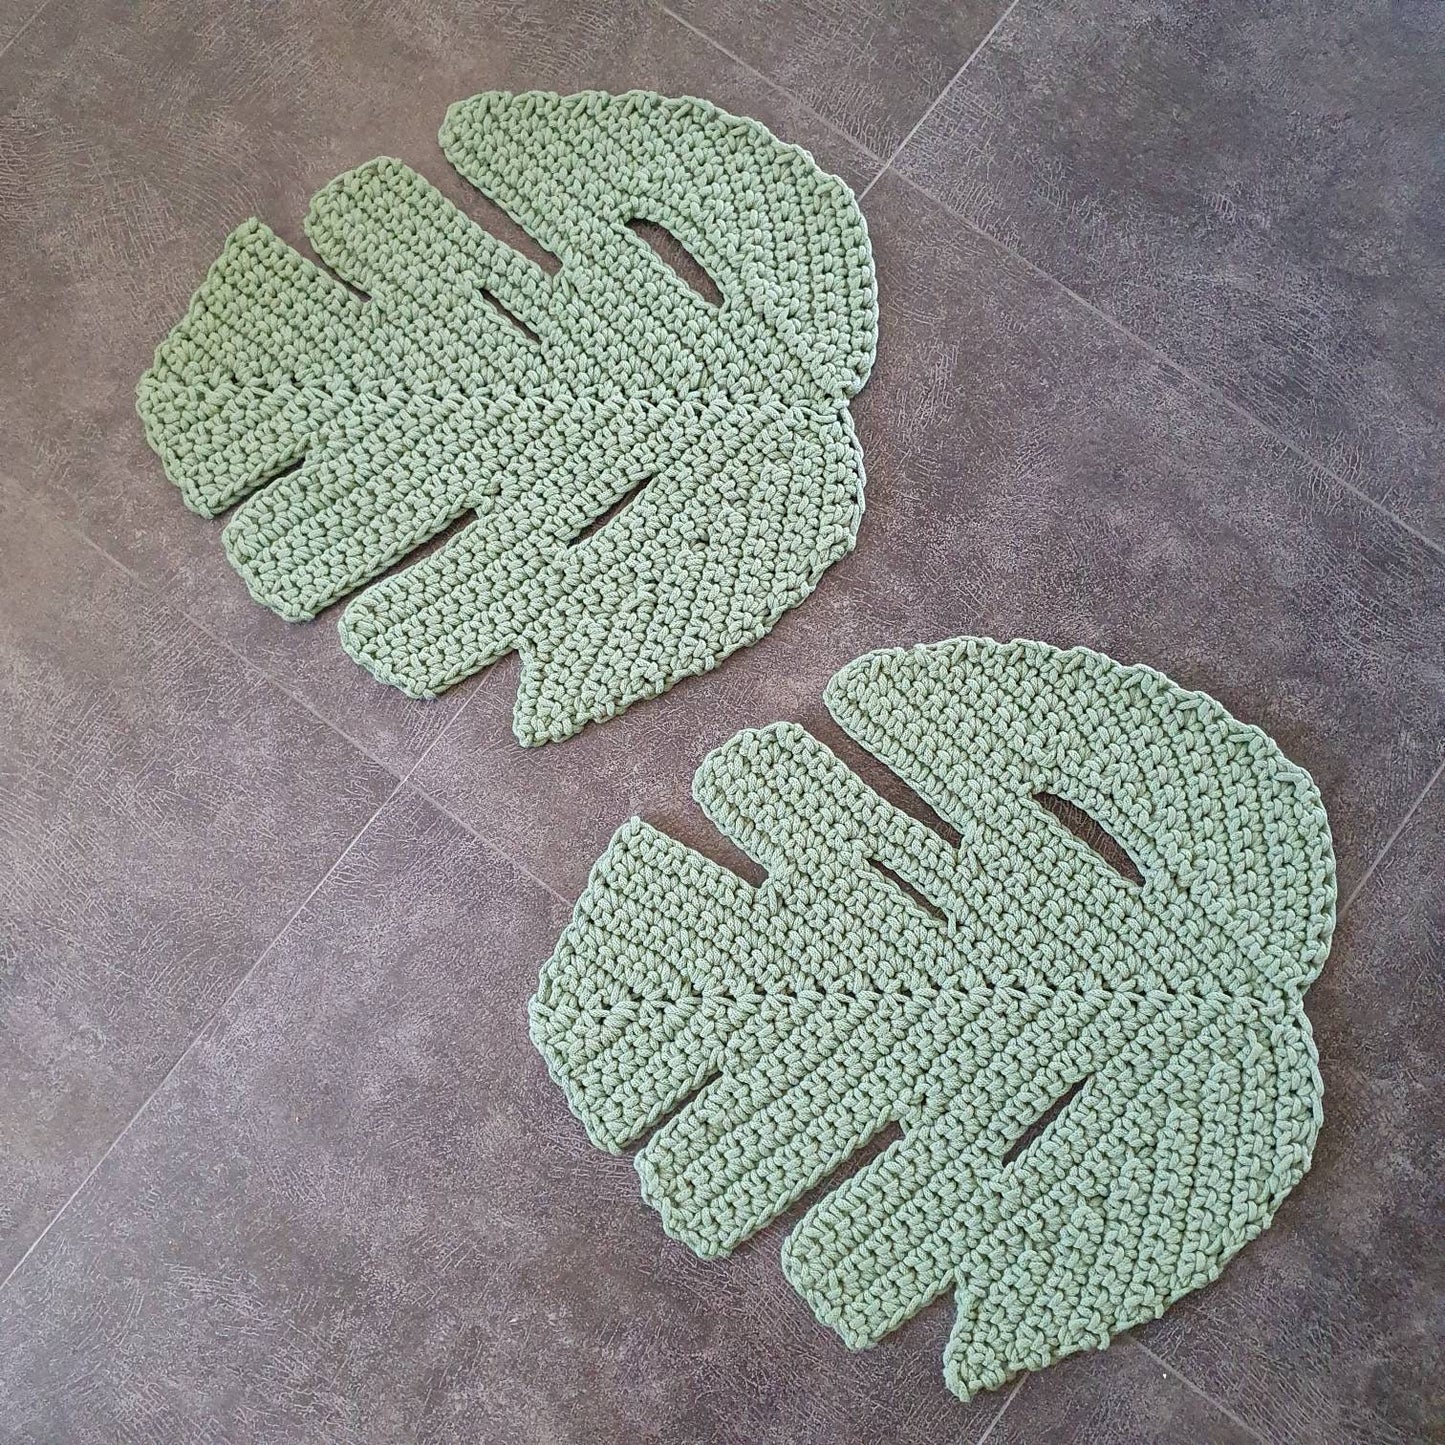 Table decoration Placemats Coaster Bathroom carpet Toilet mat Table runner Crocheted in the form of a Monstera leaf